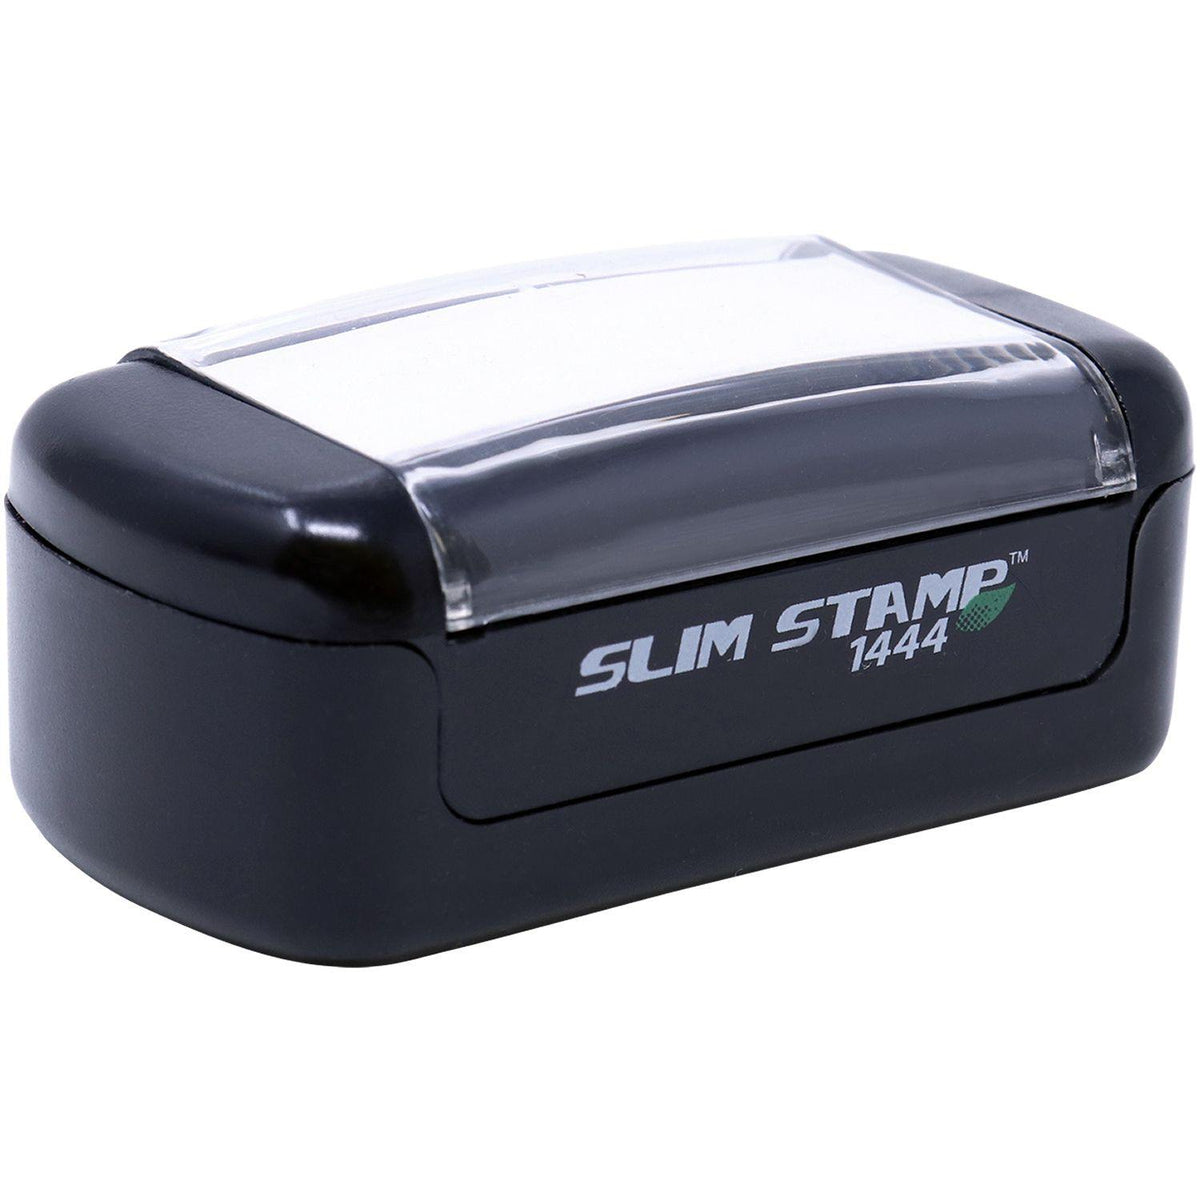 Alt View of Slim Pre-Inked Package Services Stamp Mount Angle